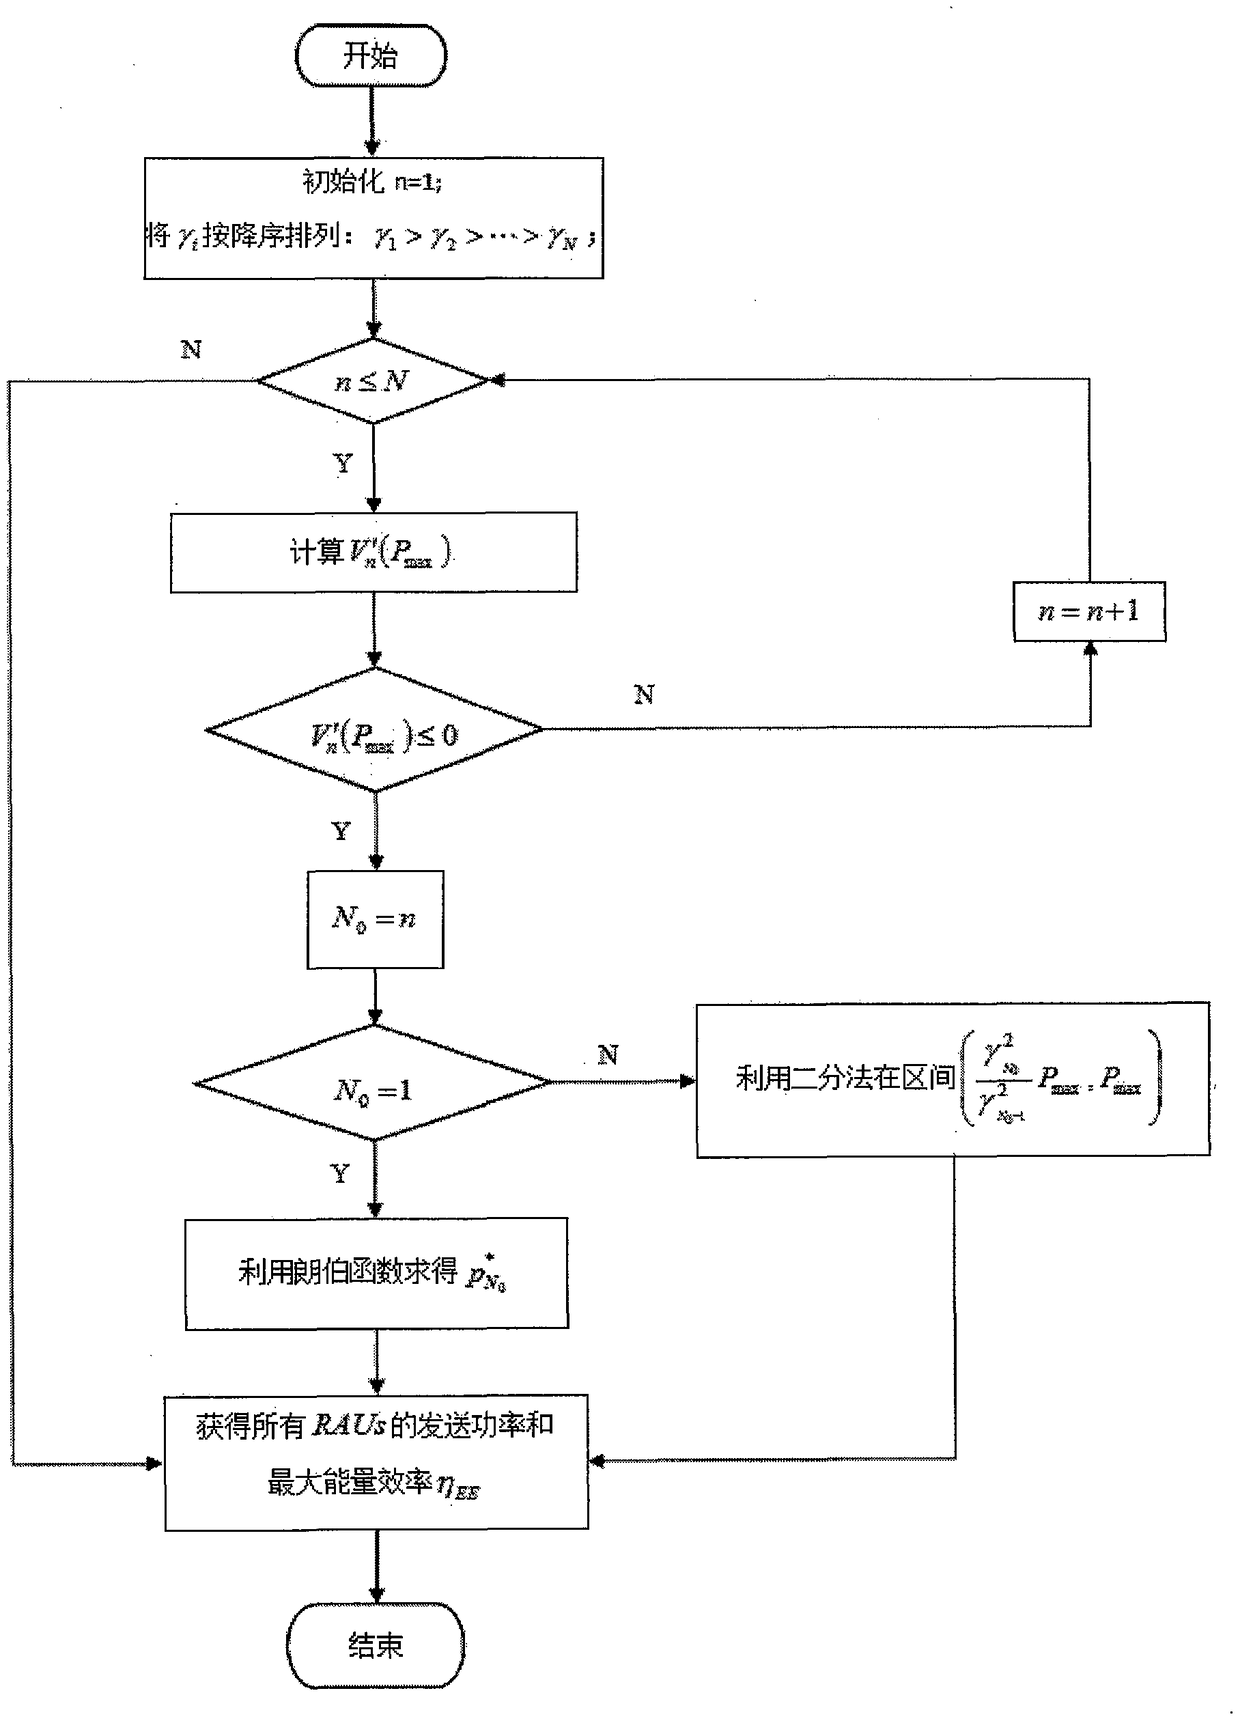 Low-complexity power distribution method based on beam forming of distributed MISO system